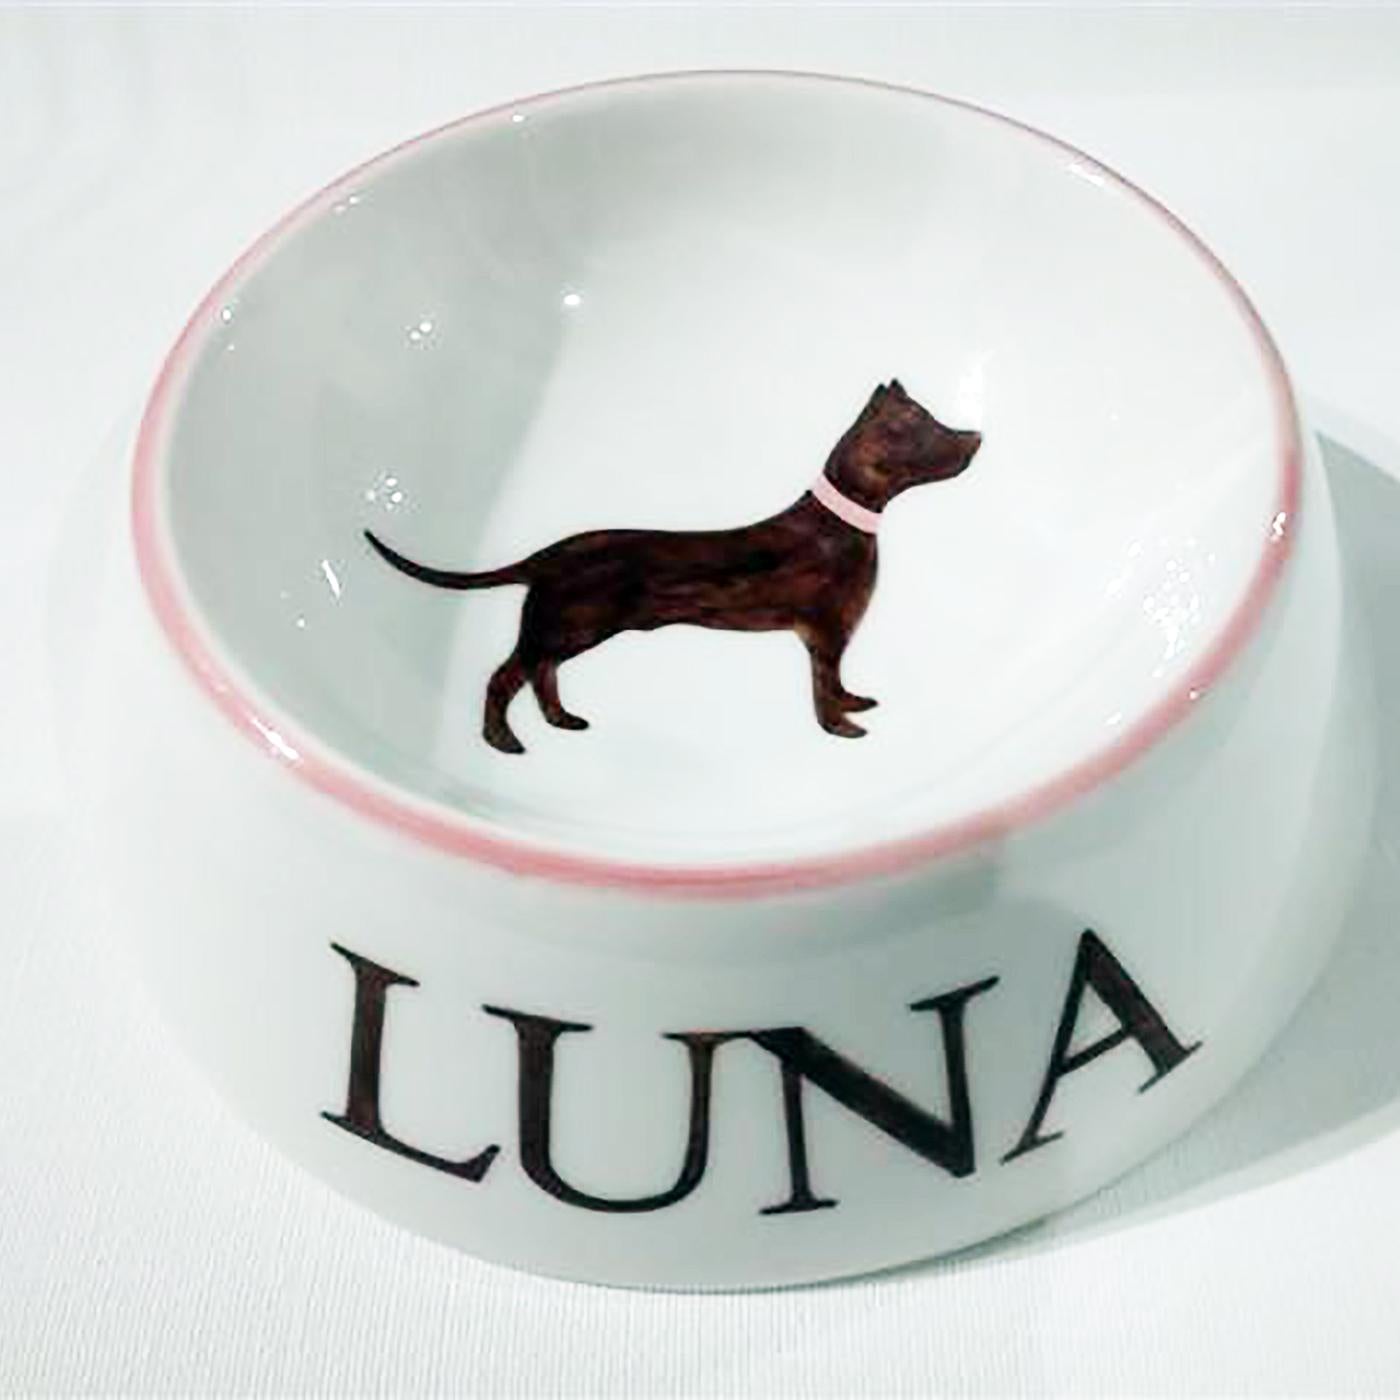 Modern Dog Bowl Porcelain Handpainted Customized Sofina Boutique Kitzbuehel In New Condition For Sale In Kitzbuhel, AT